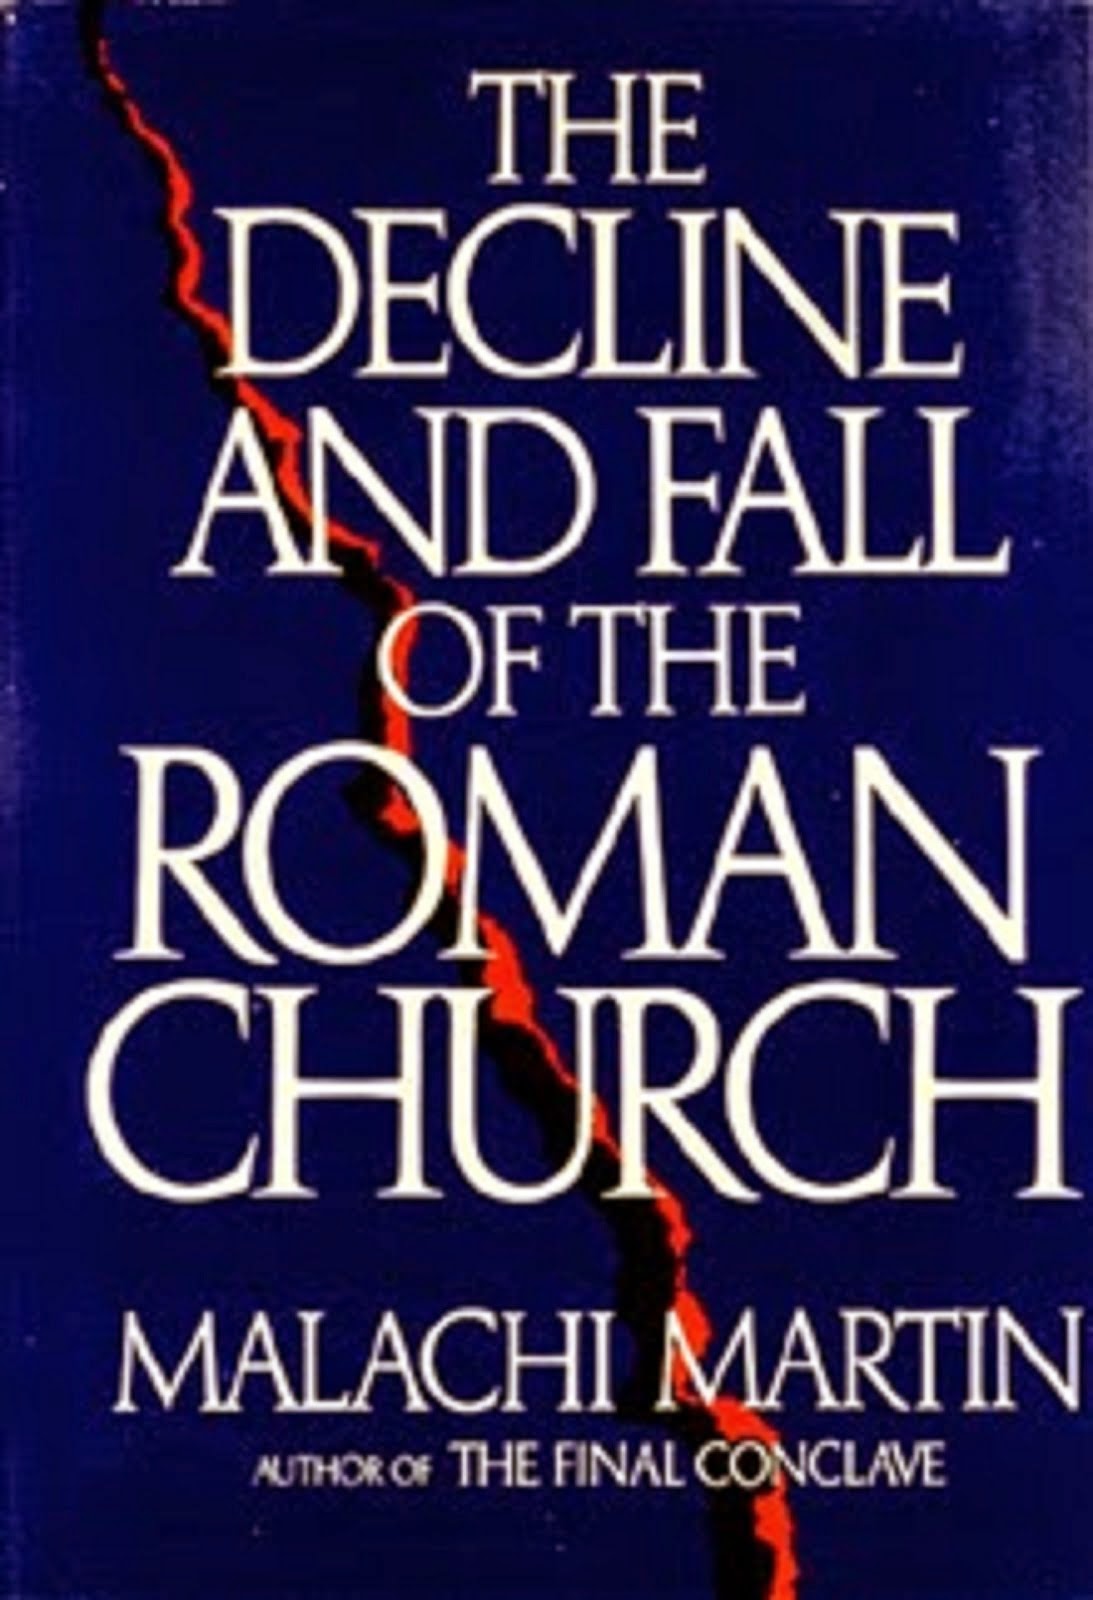 THE DECLINE AND THE FALL OF THE ROMAN CHURCH